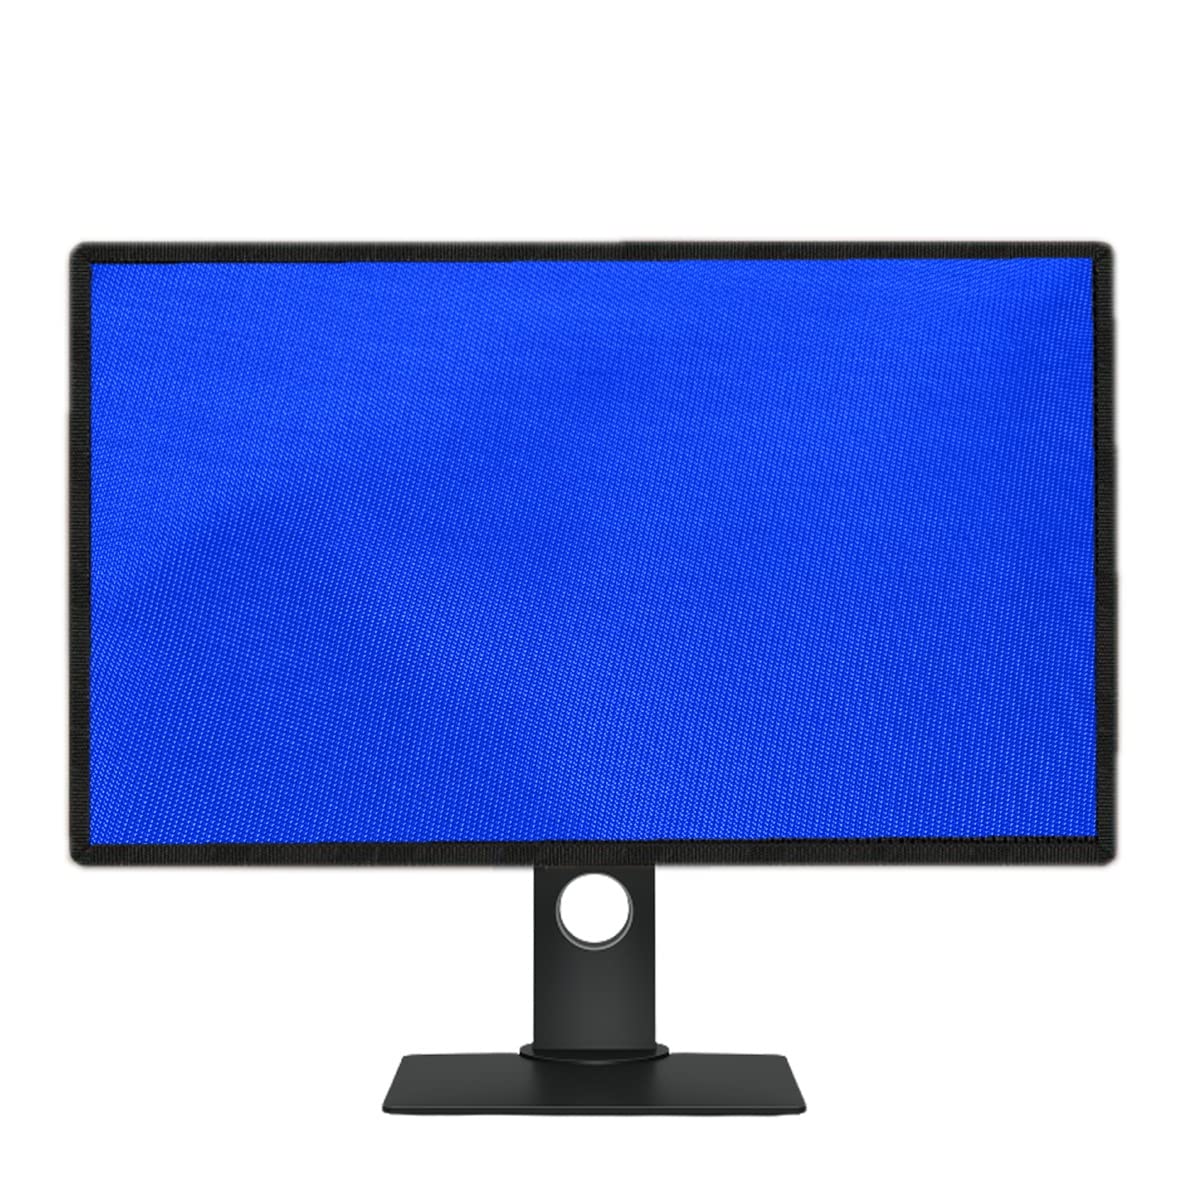 PalaP Super Premium Dust Proof Monitor Cover for BENQ 28 inches Monitor (Bright Blue)